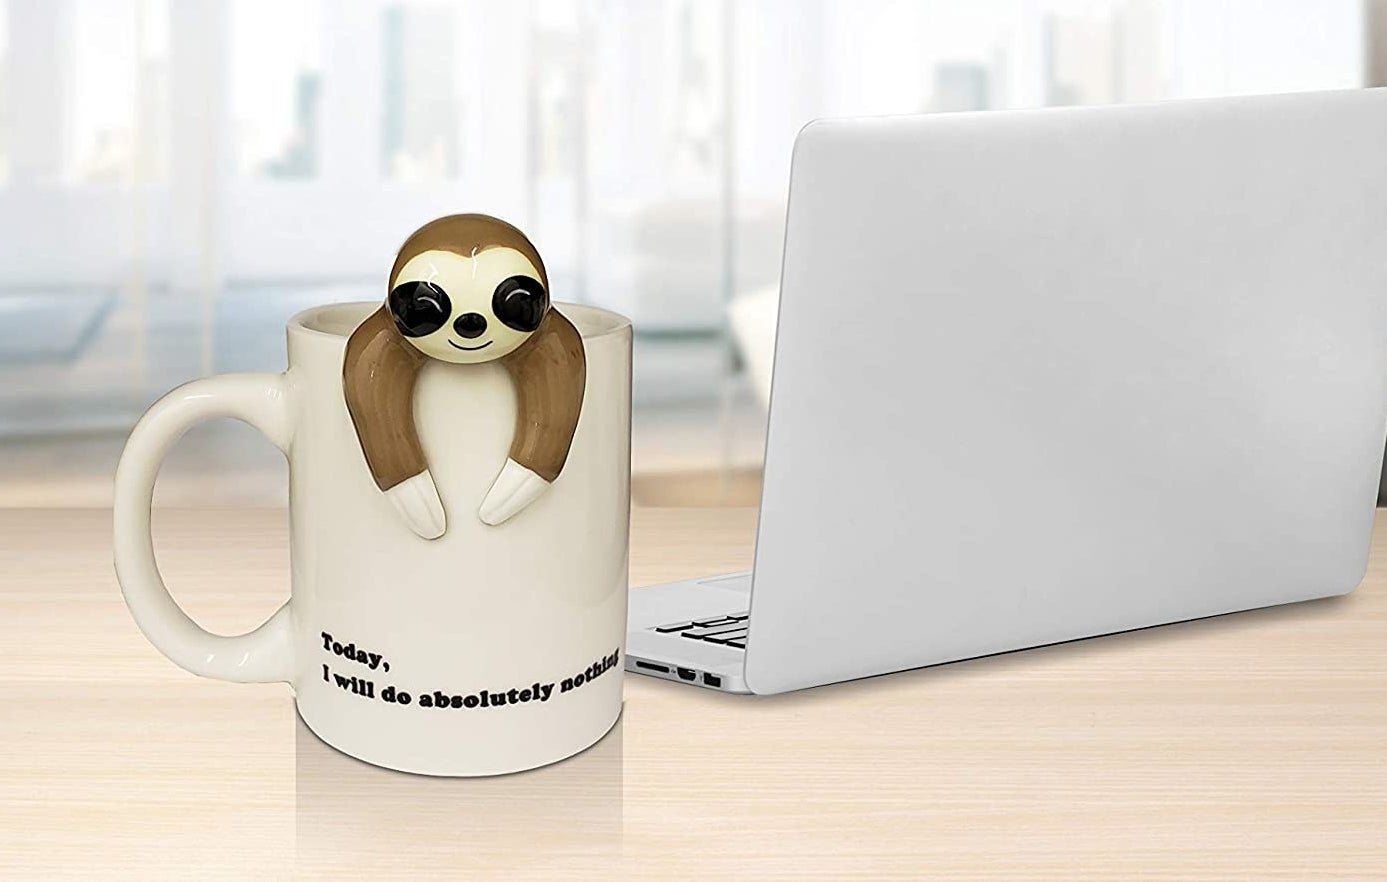 Coffee mug with sloth-shaped figure attached on the edge